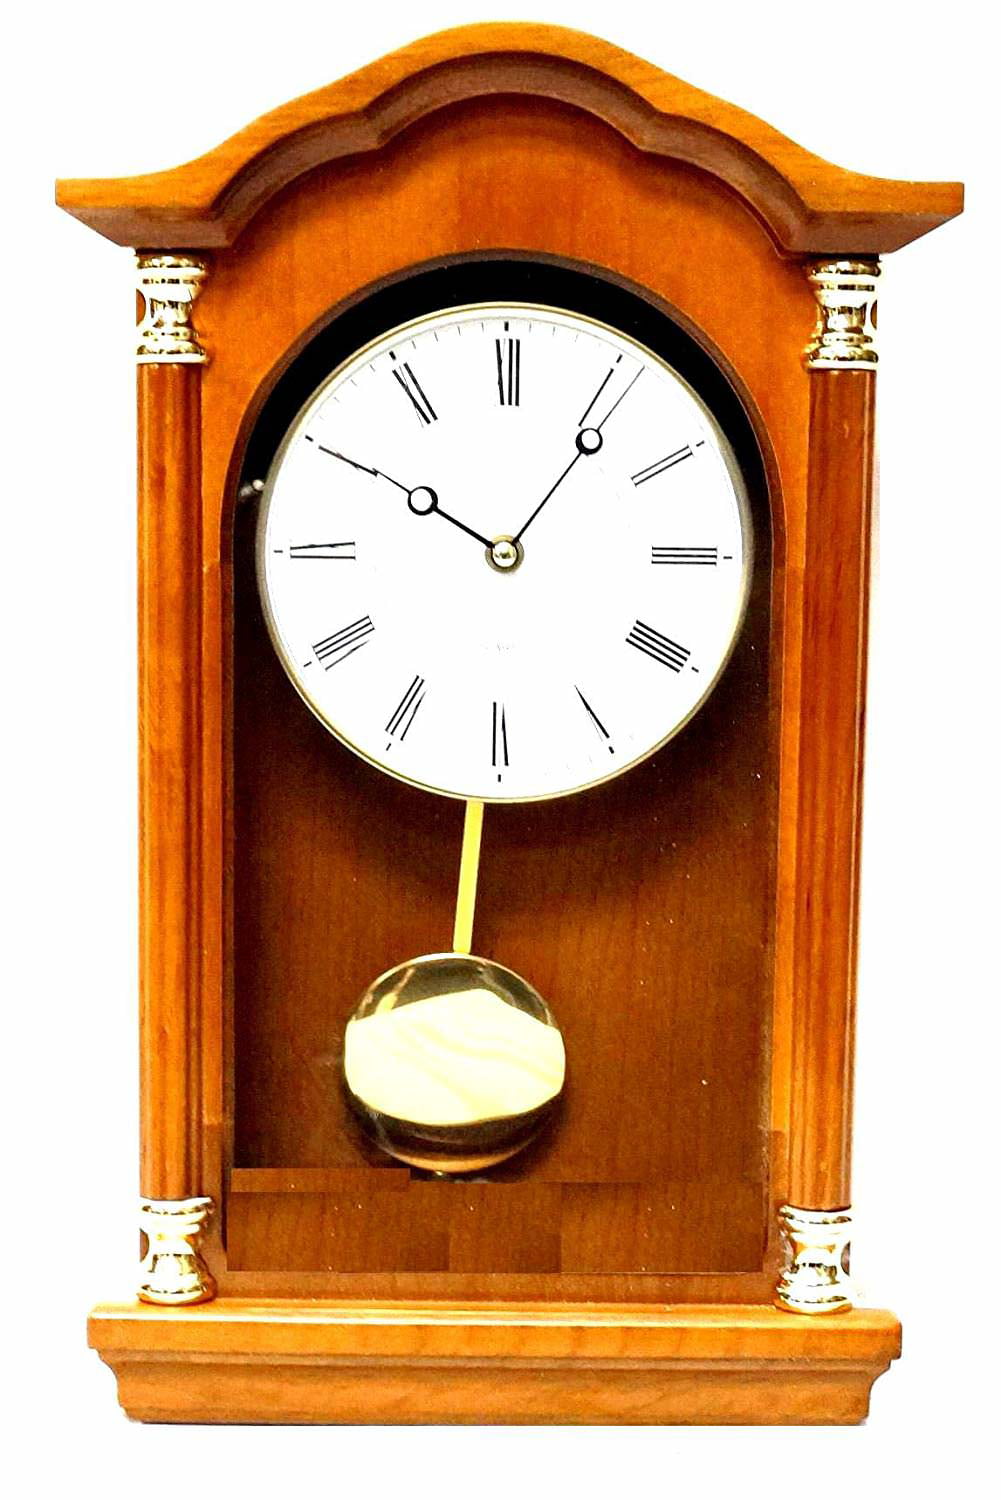 Battery Operated Kitchen For Living Room Best Pendulum Wall Clock Office & Home Décor Large Elegant Wooden Design 27.25 x 11.25 inches Silent Decorative Wood Clock With Swinging Pendulum 